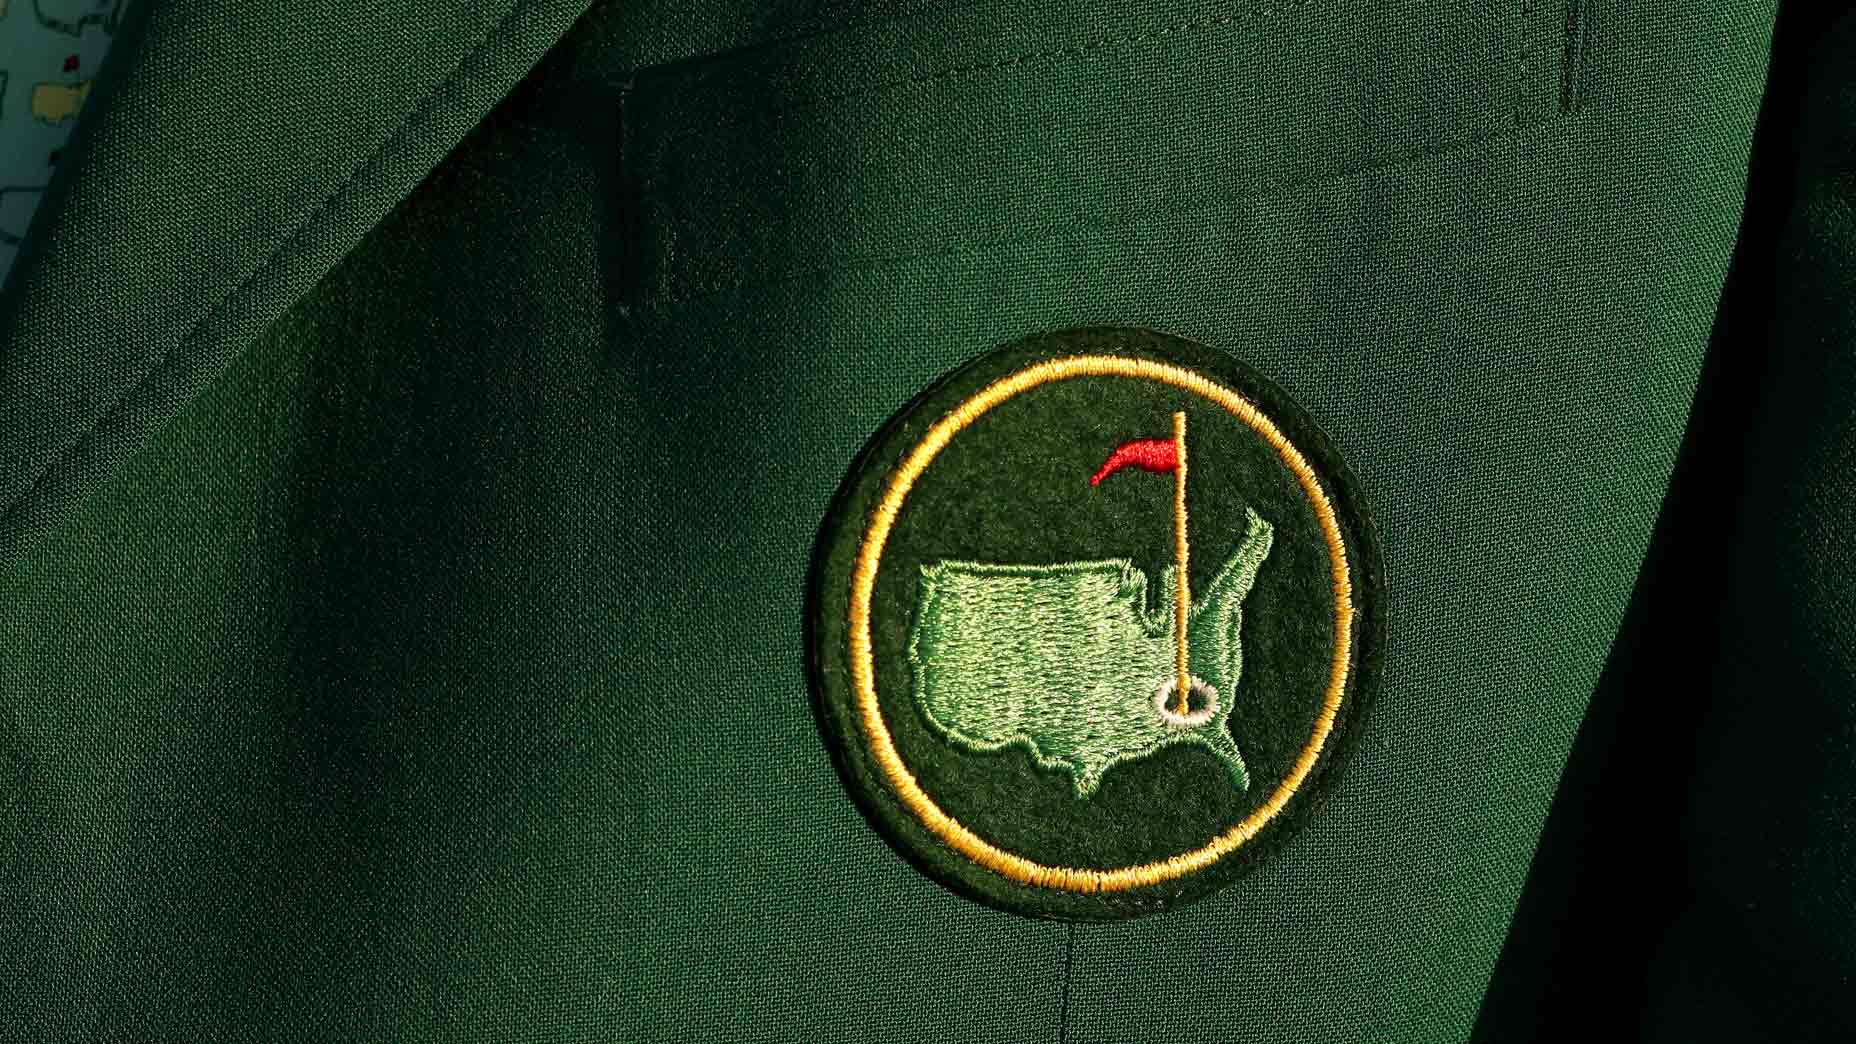 How many members does Augusta National have?